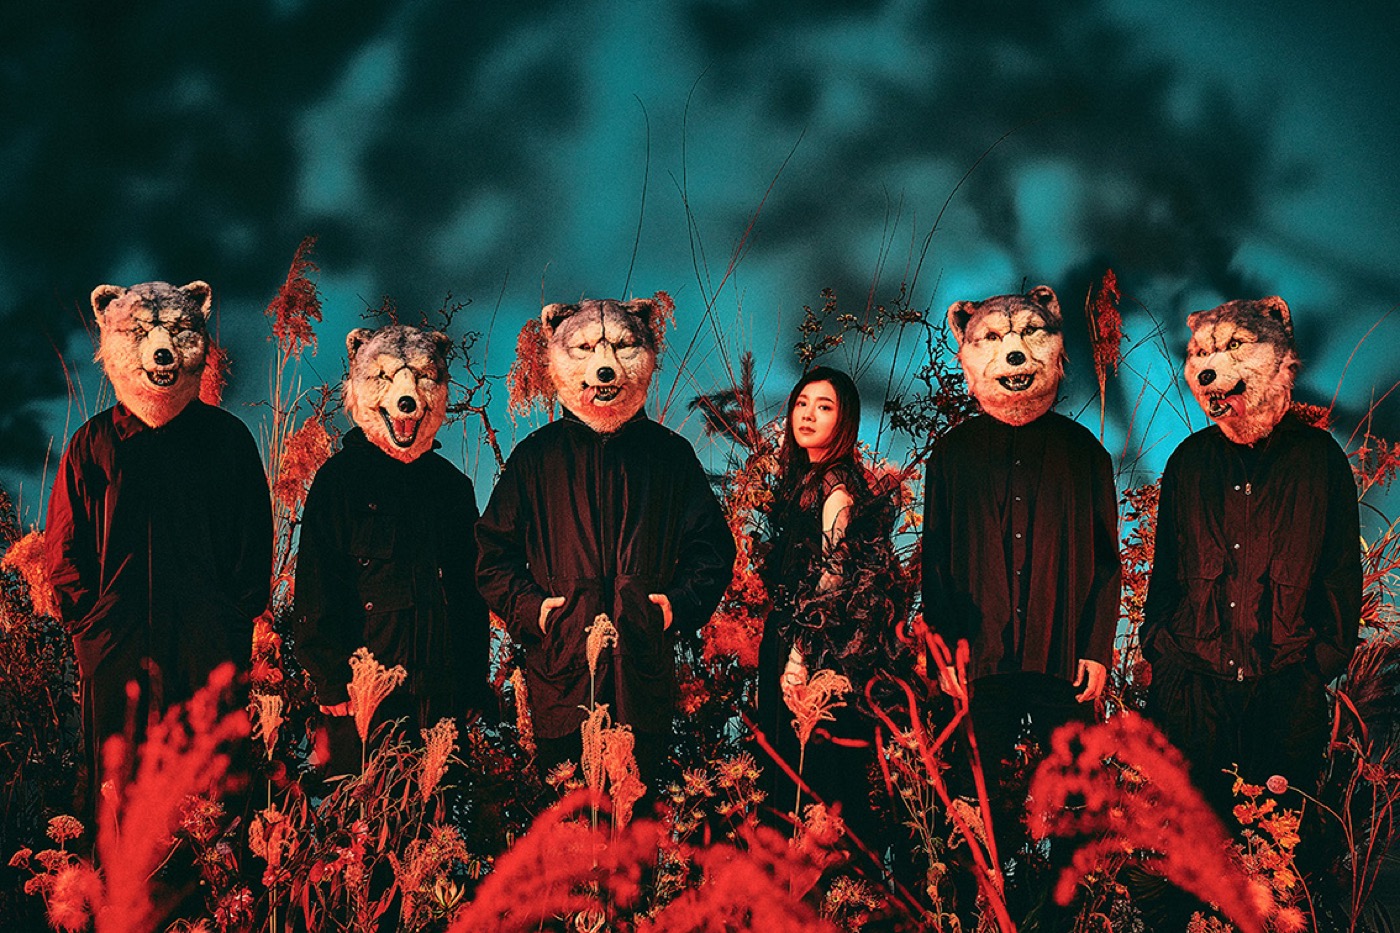 MAN WITH A MISSION×milet、アニメ『鬼滅の刃』主題歌「絆ノ奇跡」をサプライズ配信